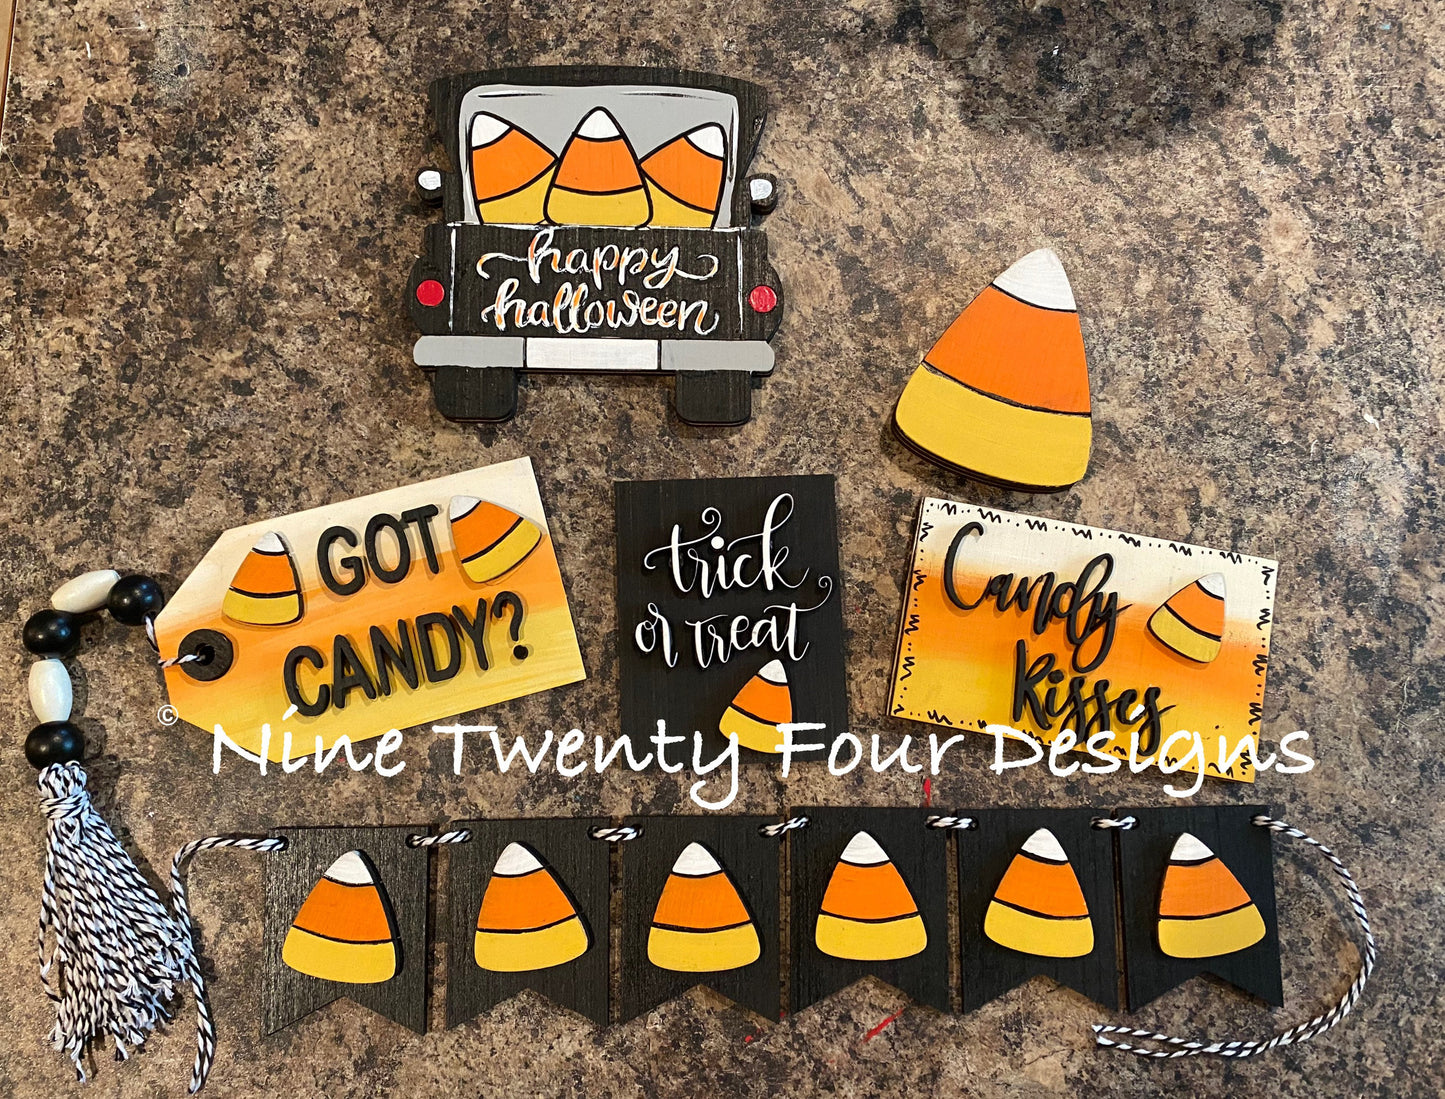 Candy corn tiered tray set